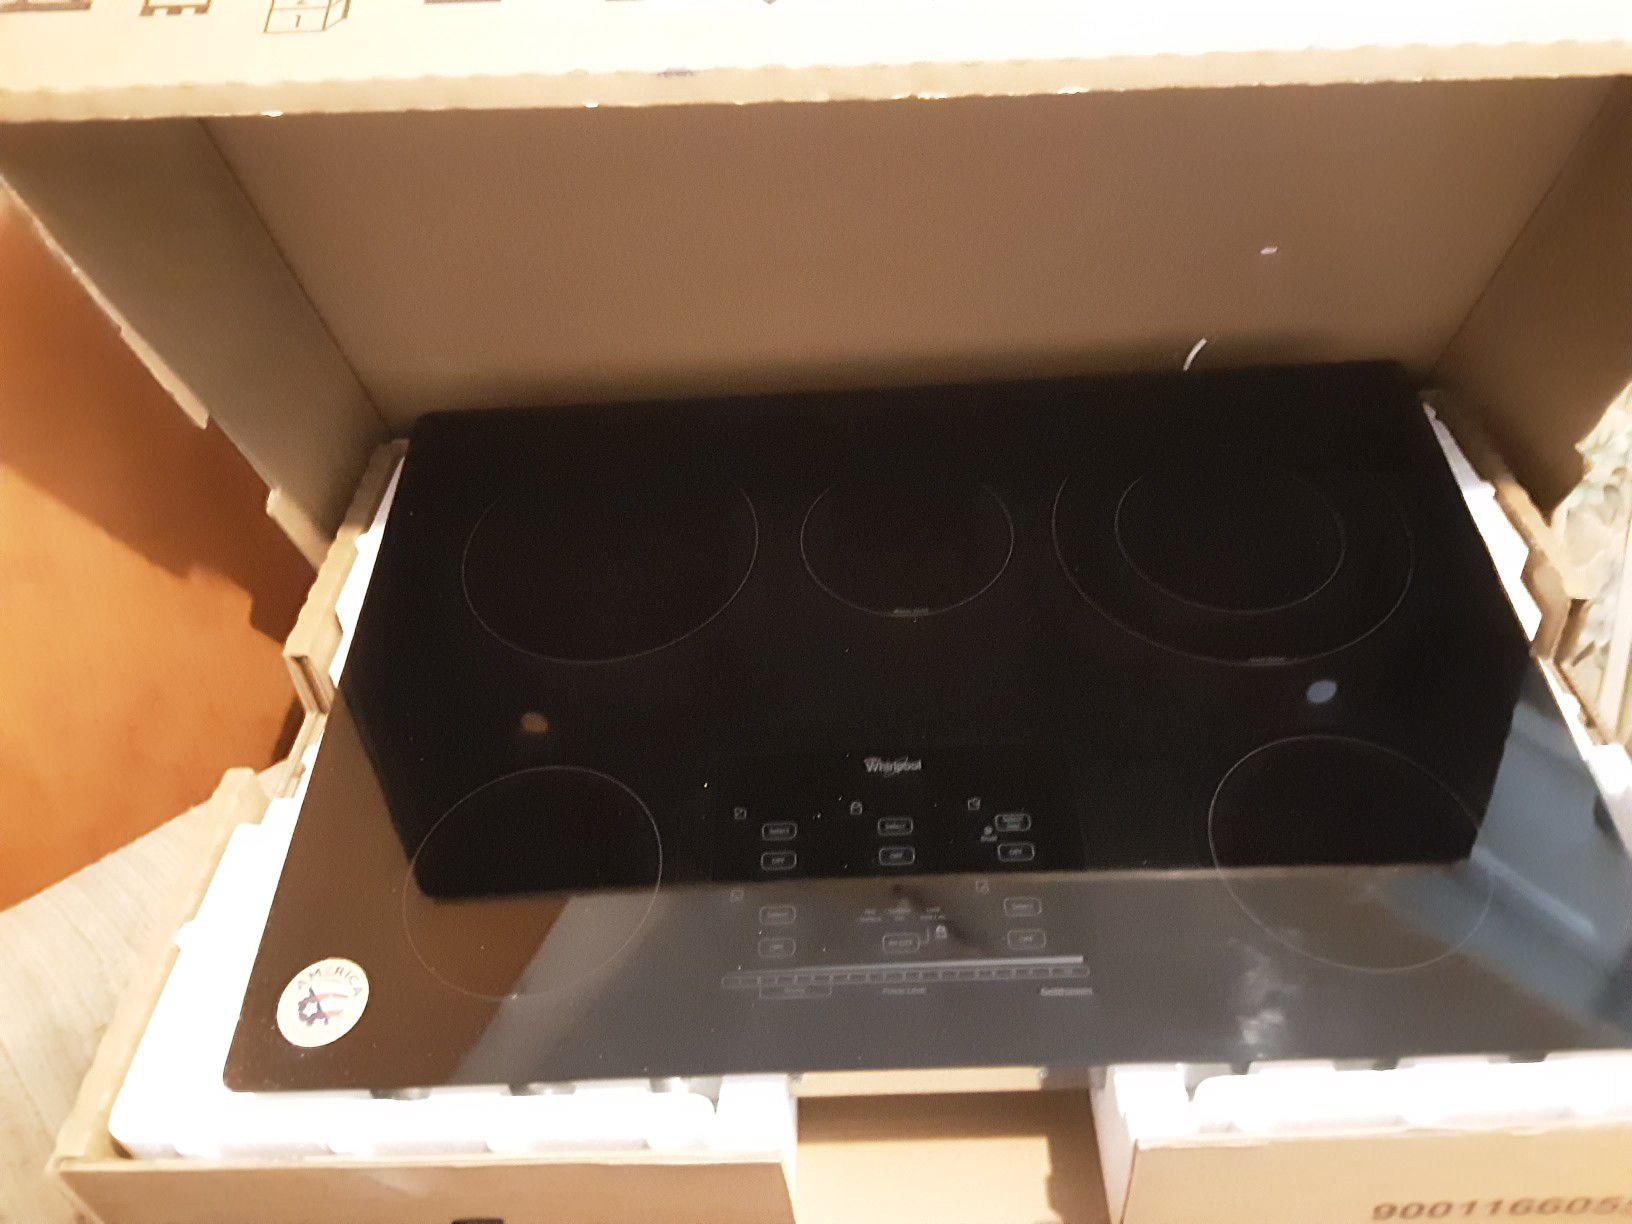 Whirlpool Gold Series 30" Glass Cookktop (came with the new house but we upgraded our appliance package so I dont need this one)